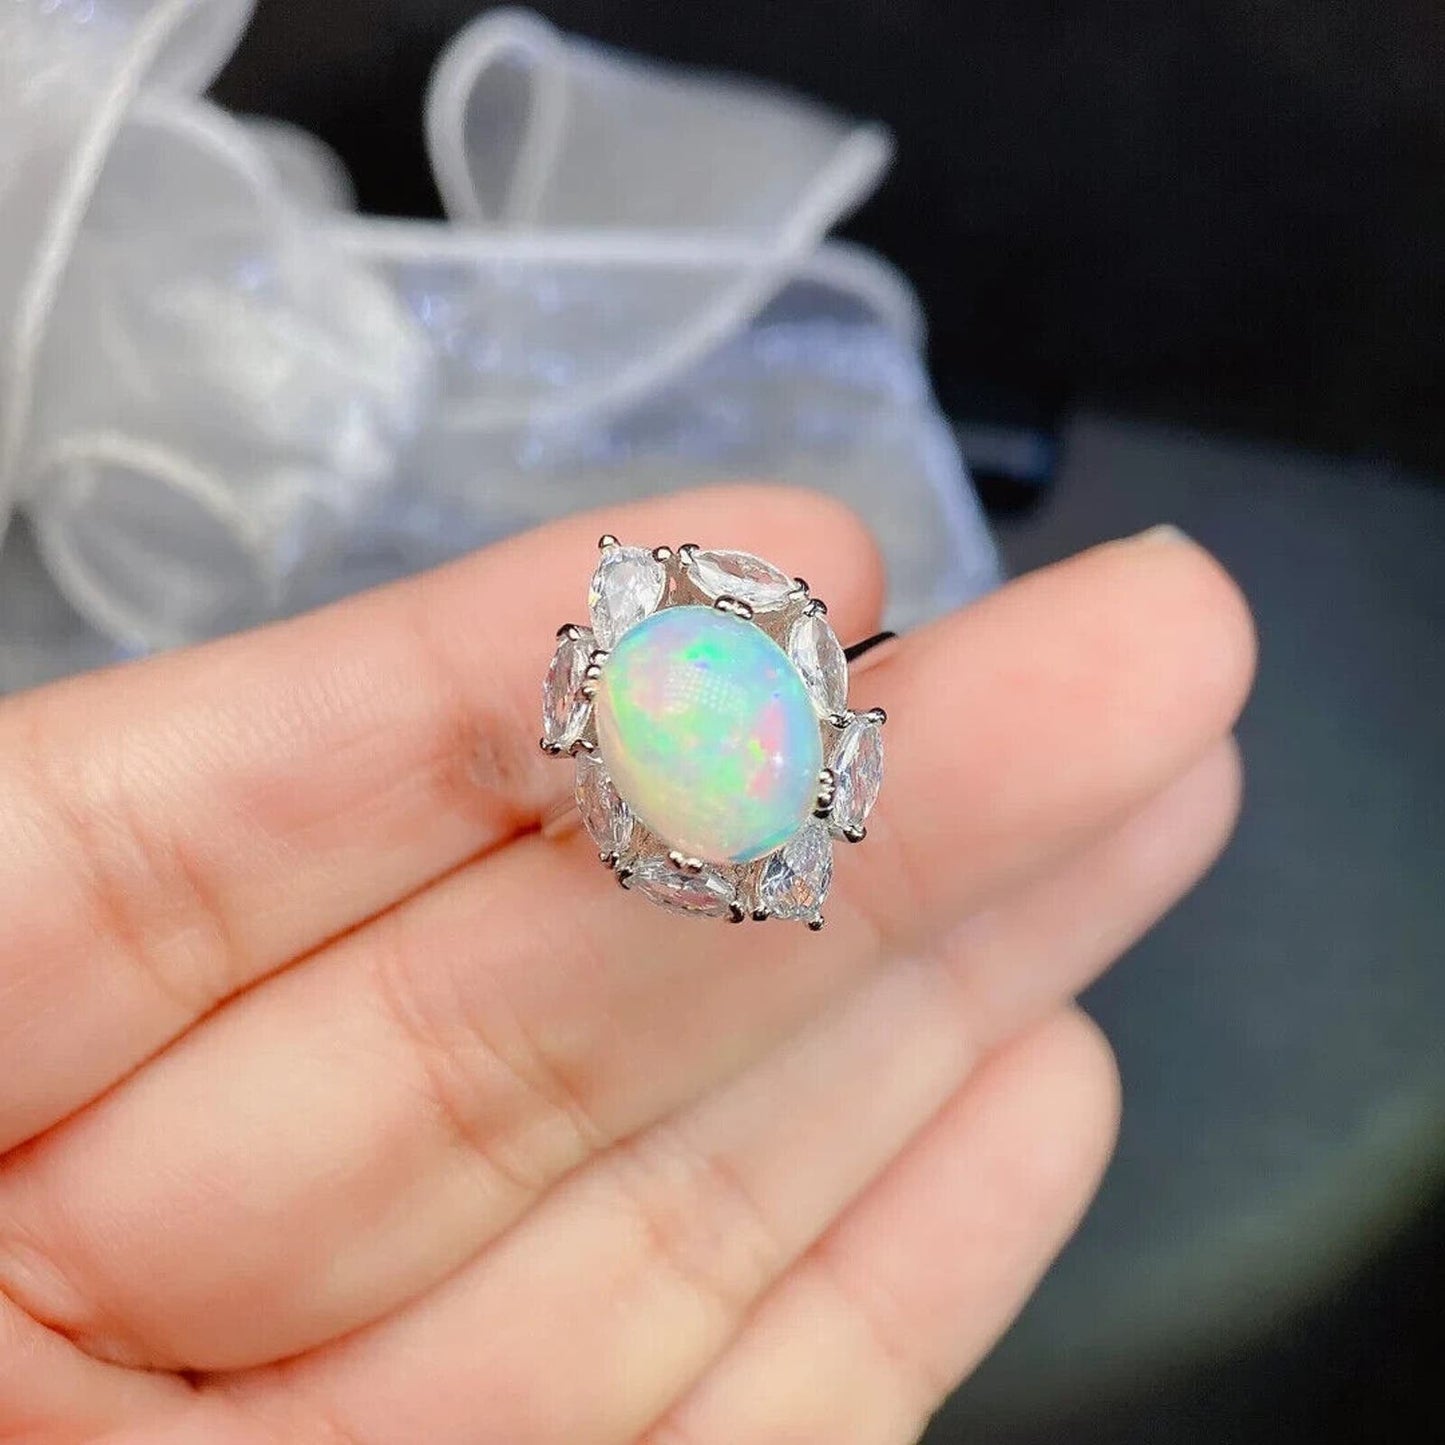 White Fire Opal Cluster Ring 10x12mm Sterling Silver